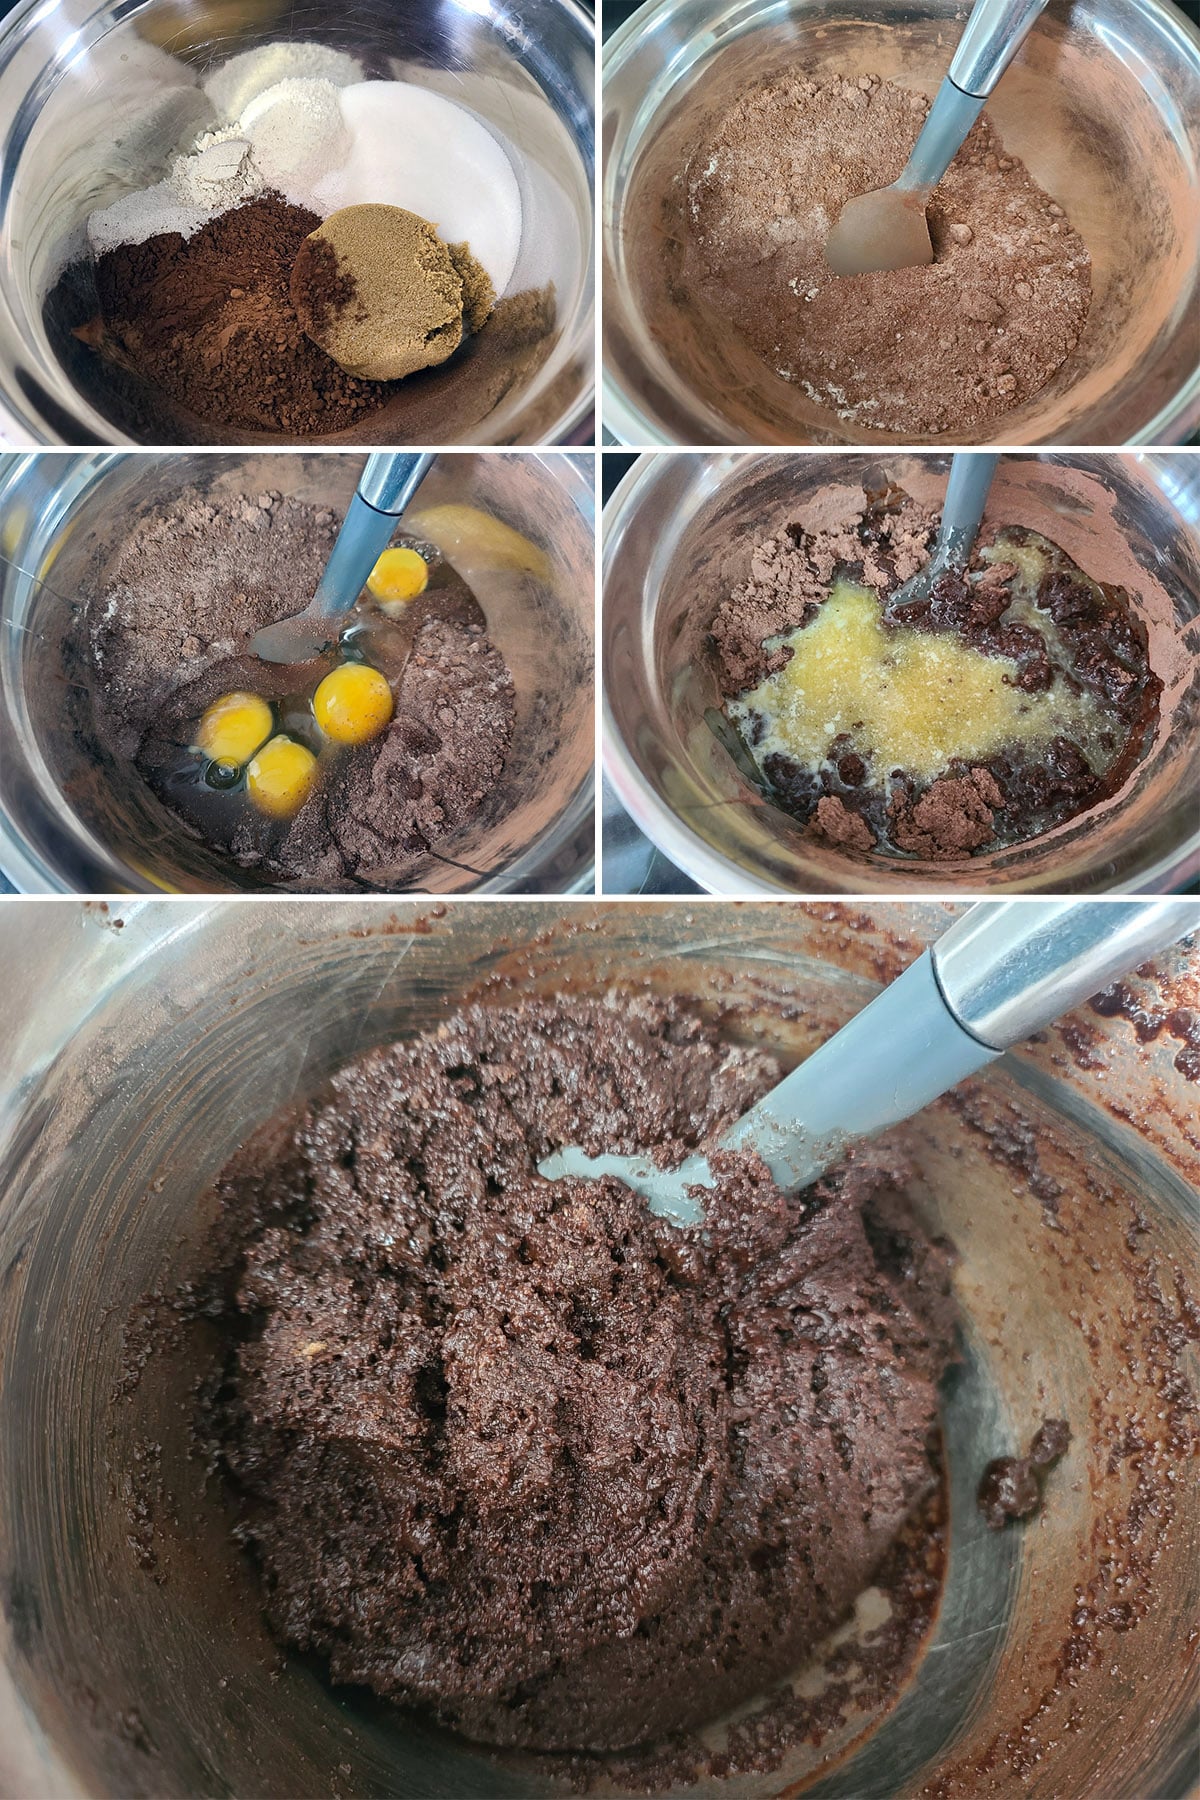 A 5 part image showing the brownie batter being mixed.